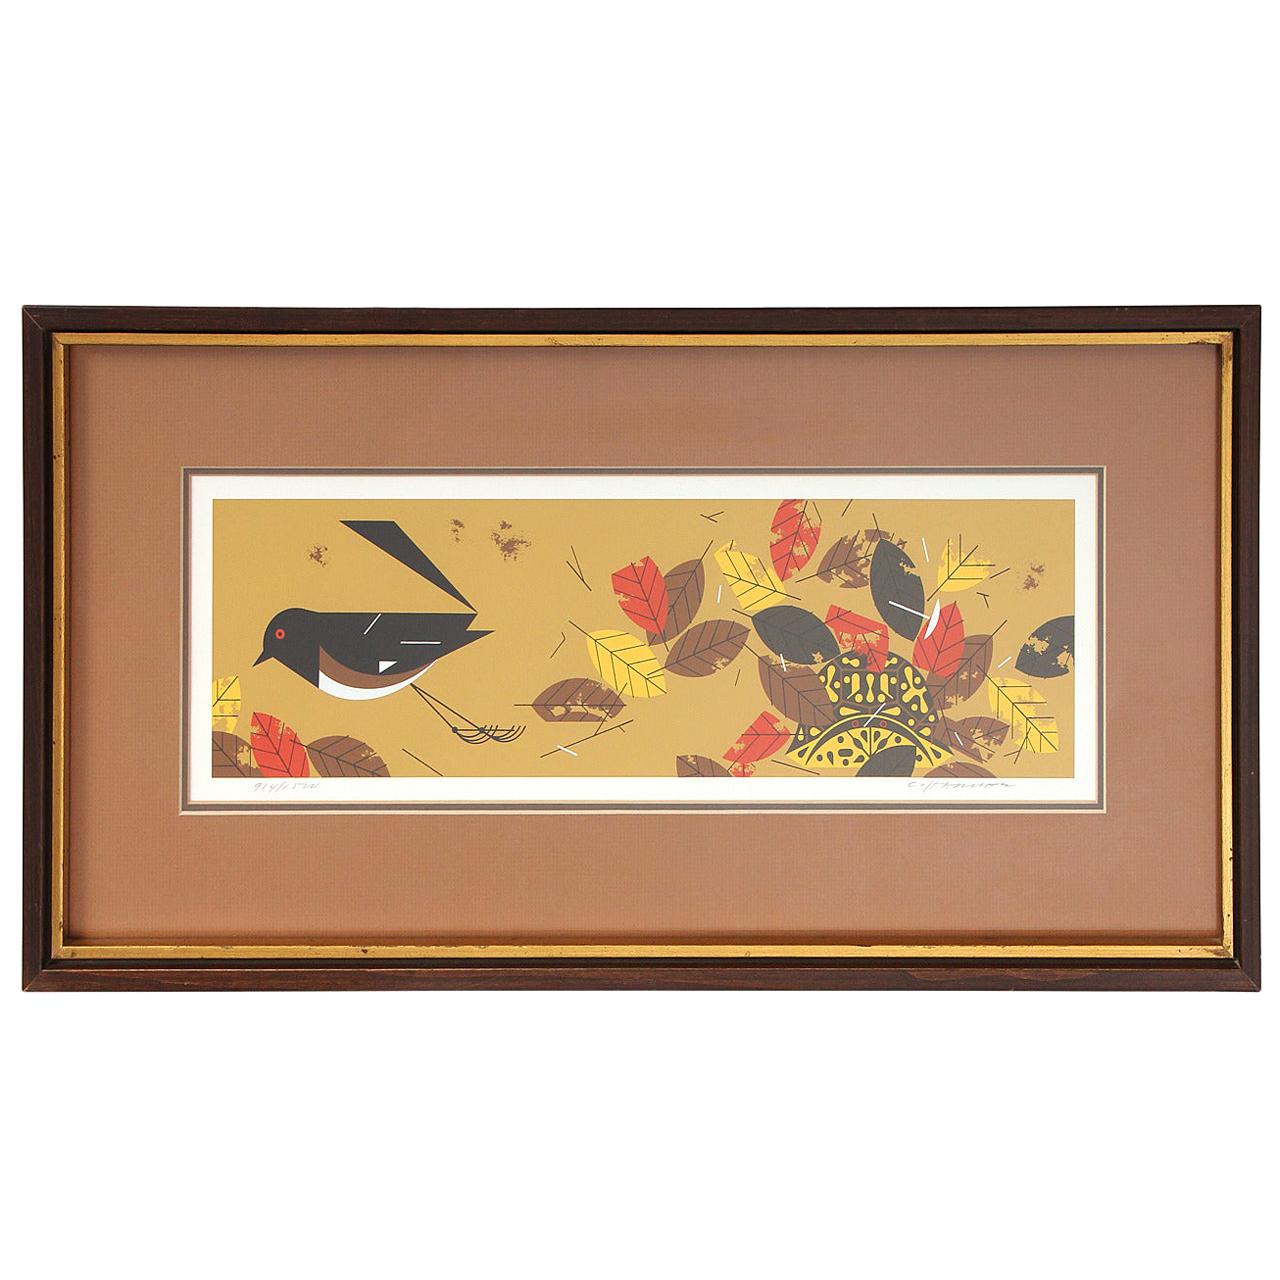 Modernist Print of Bird with Fall Leaves by Charley Harper